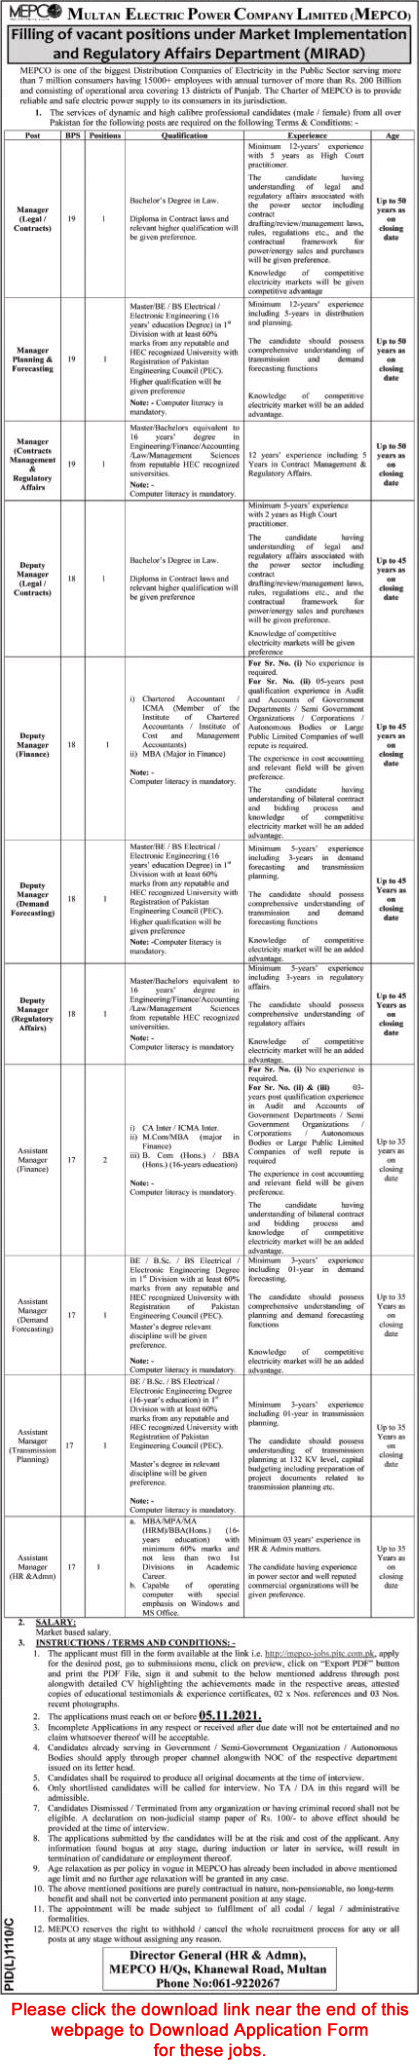 MEPCO Jobs 2021 October Application Form WAPDA Multan Electric Power Company Limited Latest